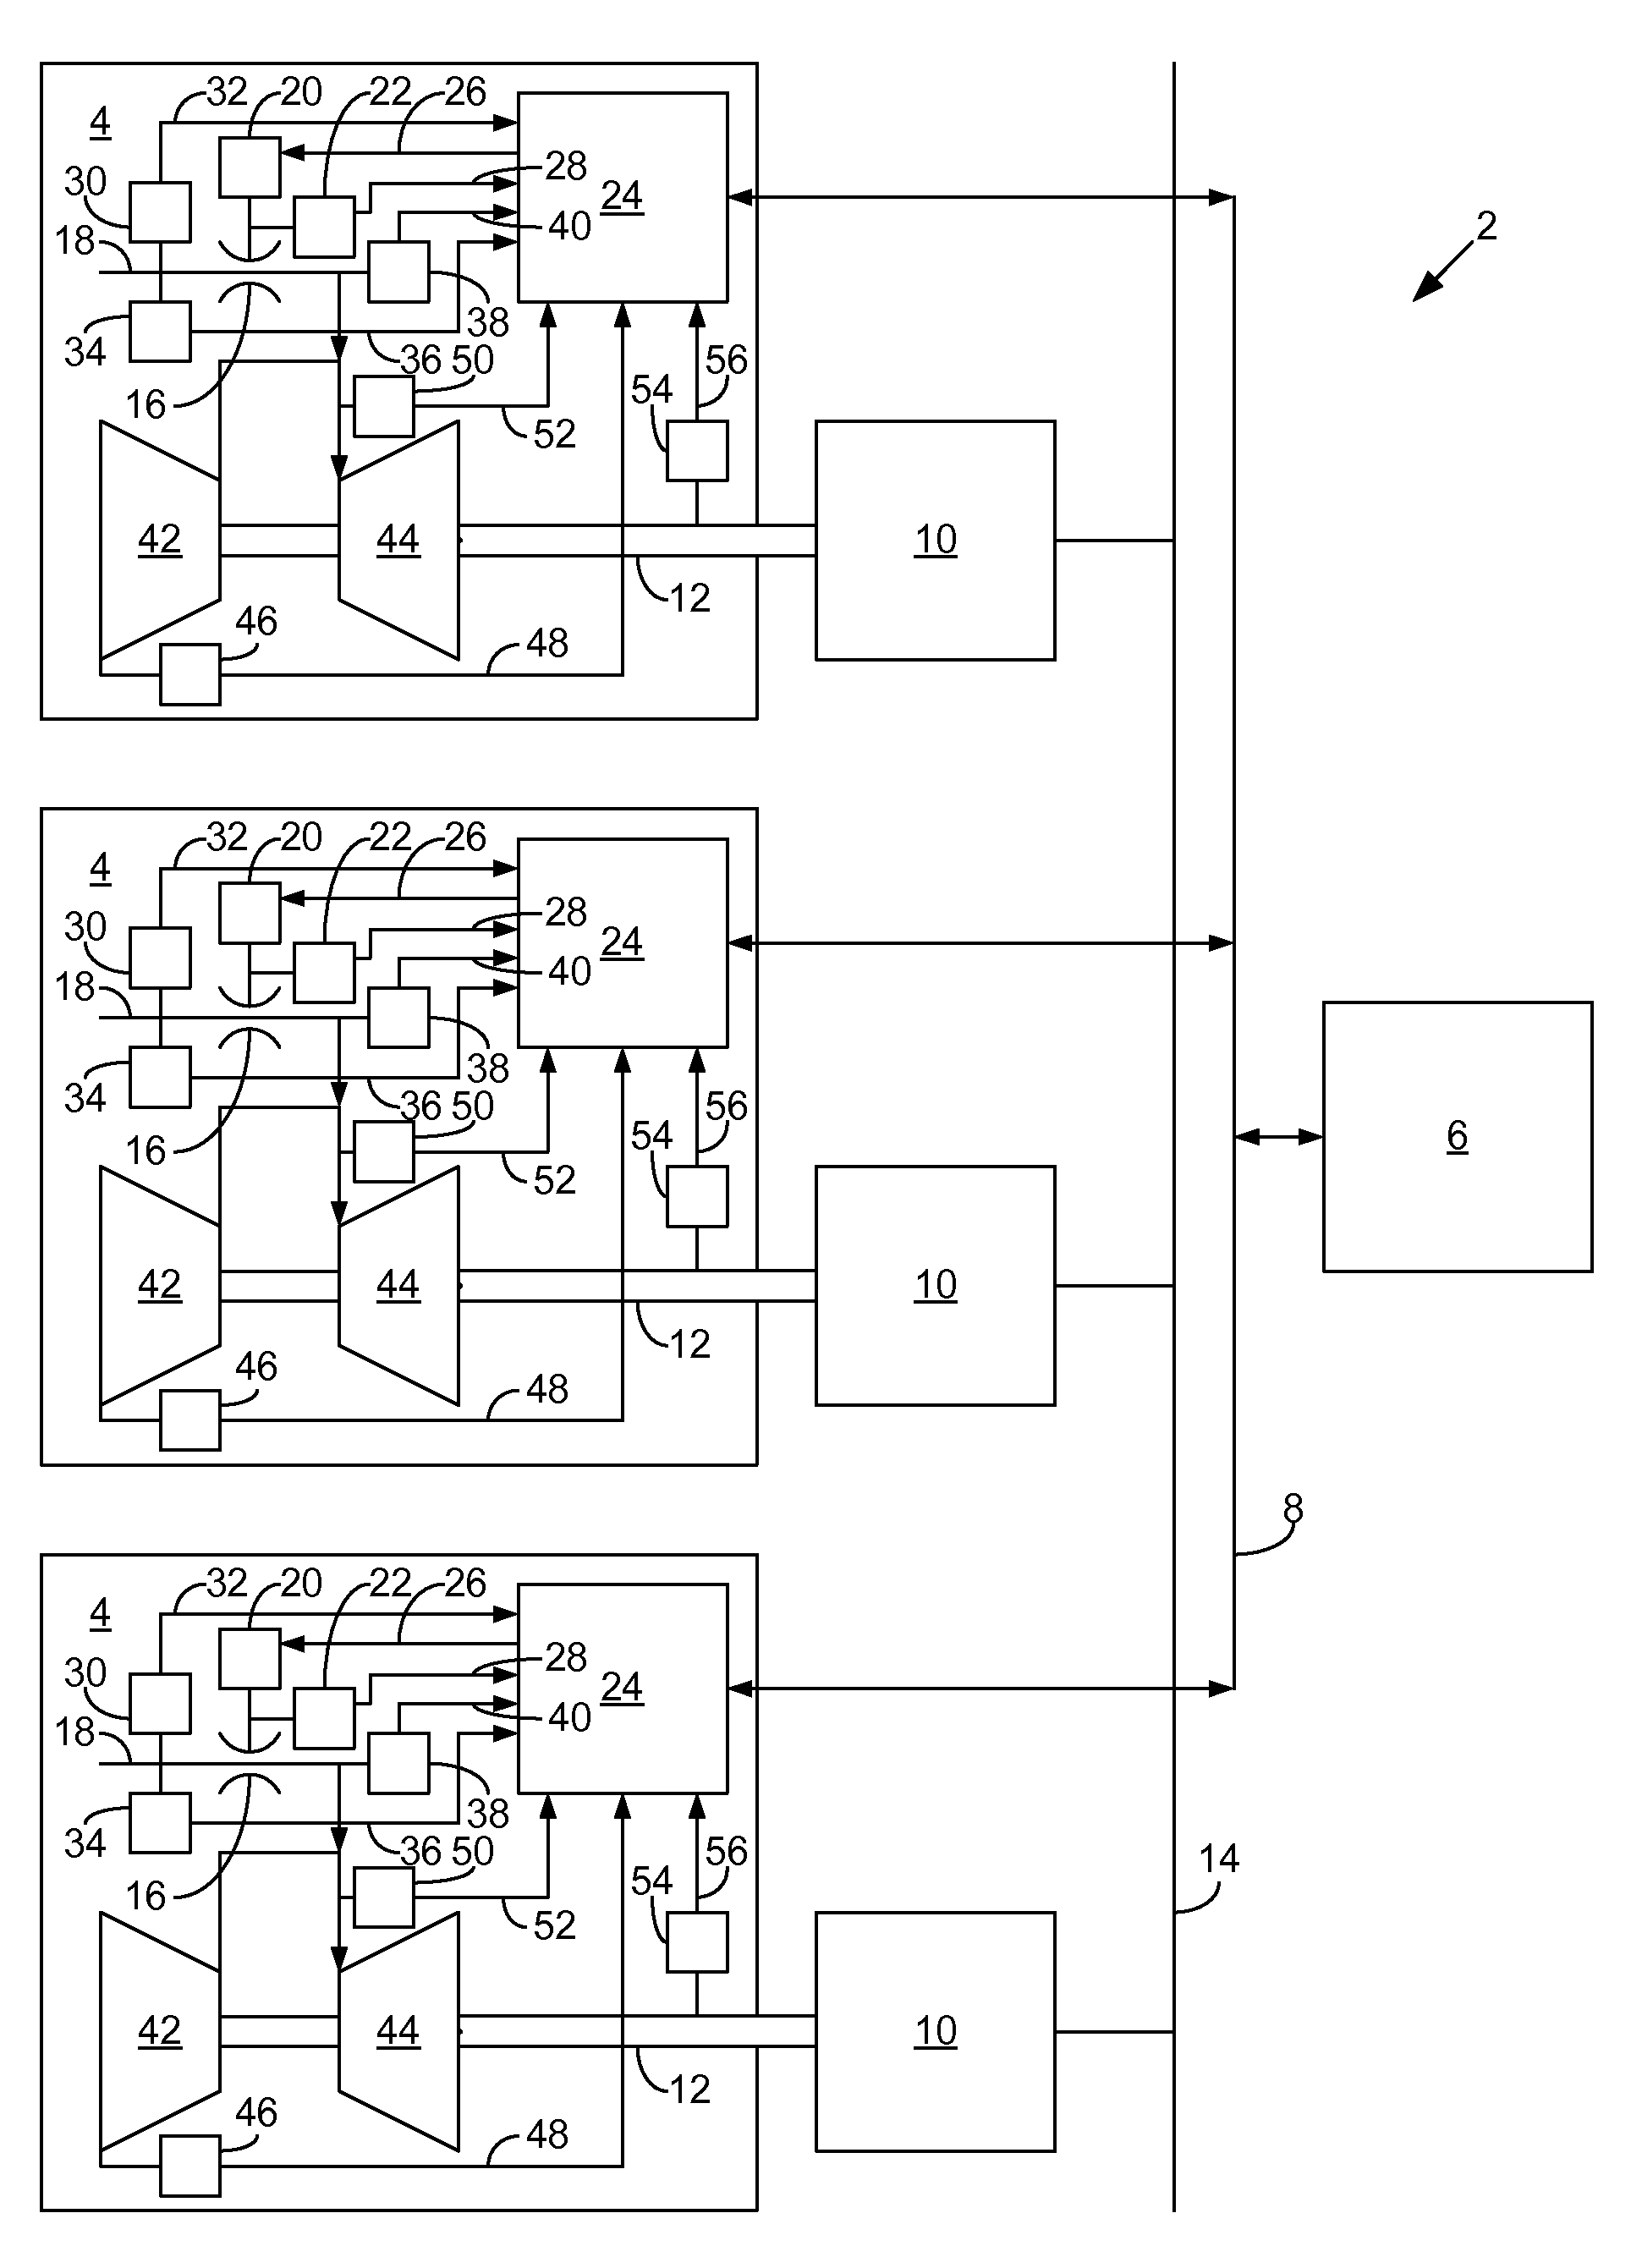 Distributed engine control system